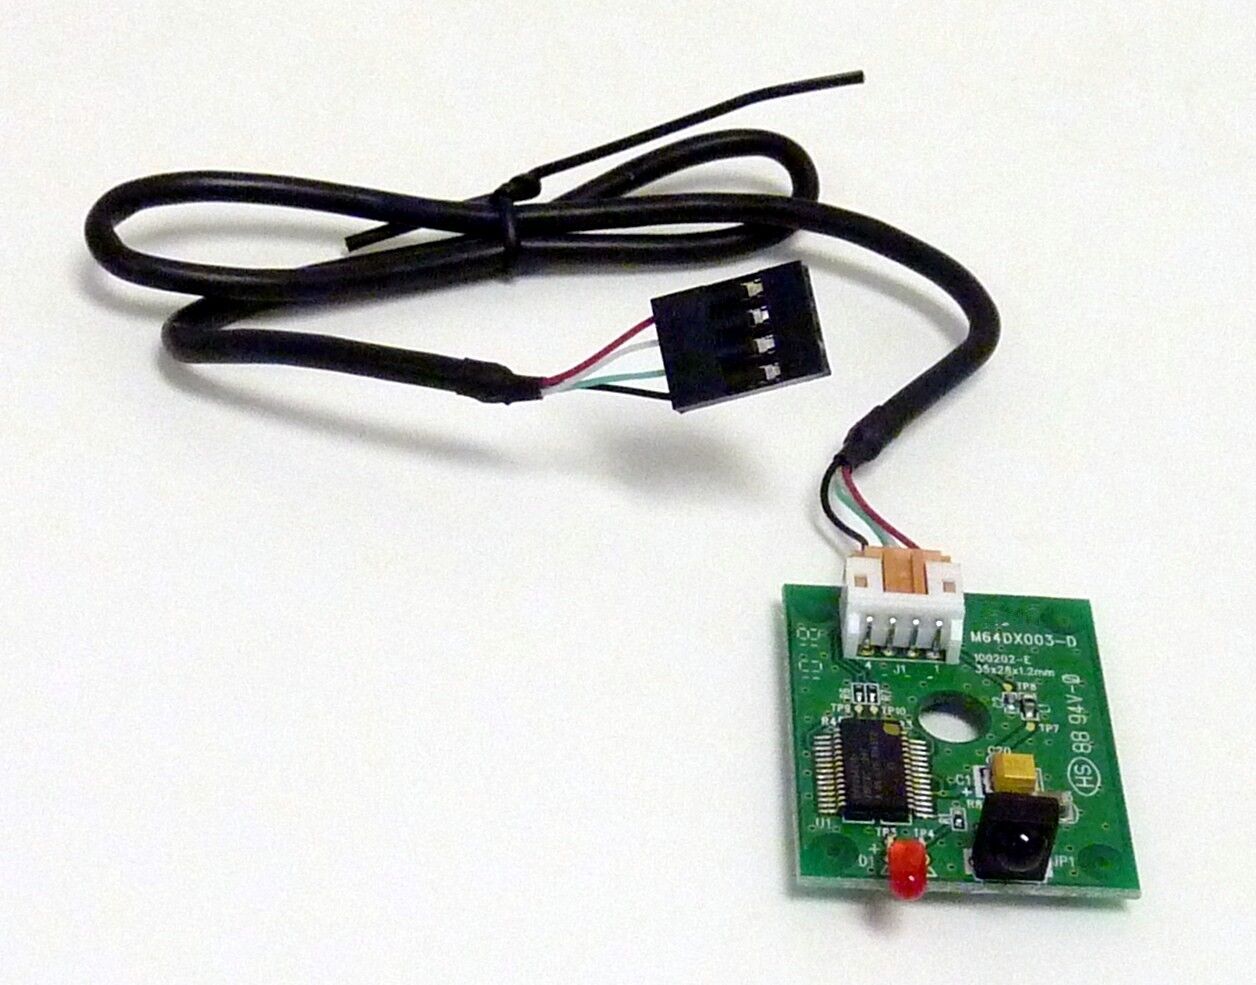 USB Internal Infrared (IR) Receiver with Cable and Custom Mounting Bracket